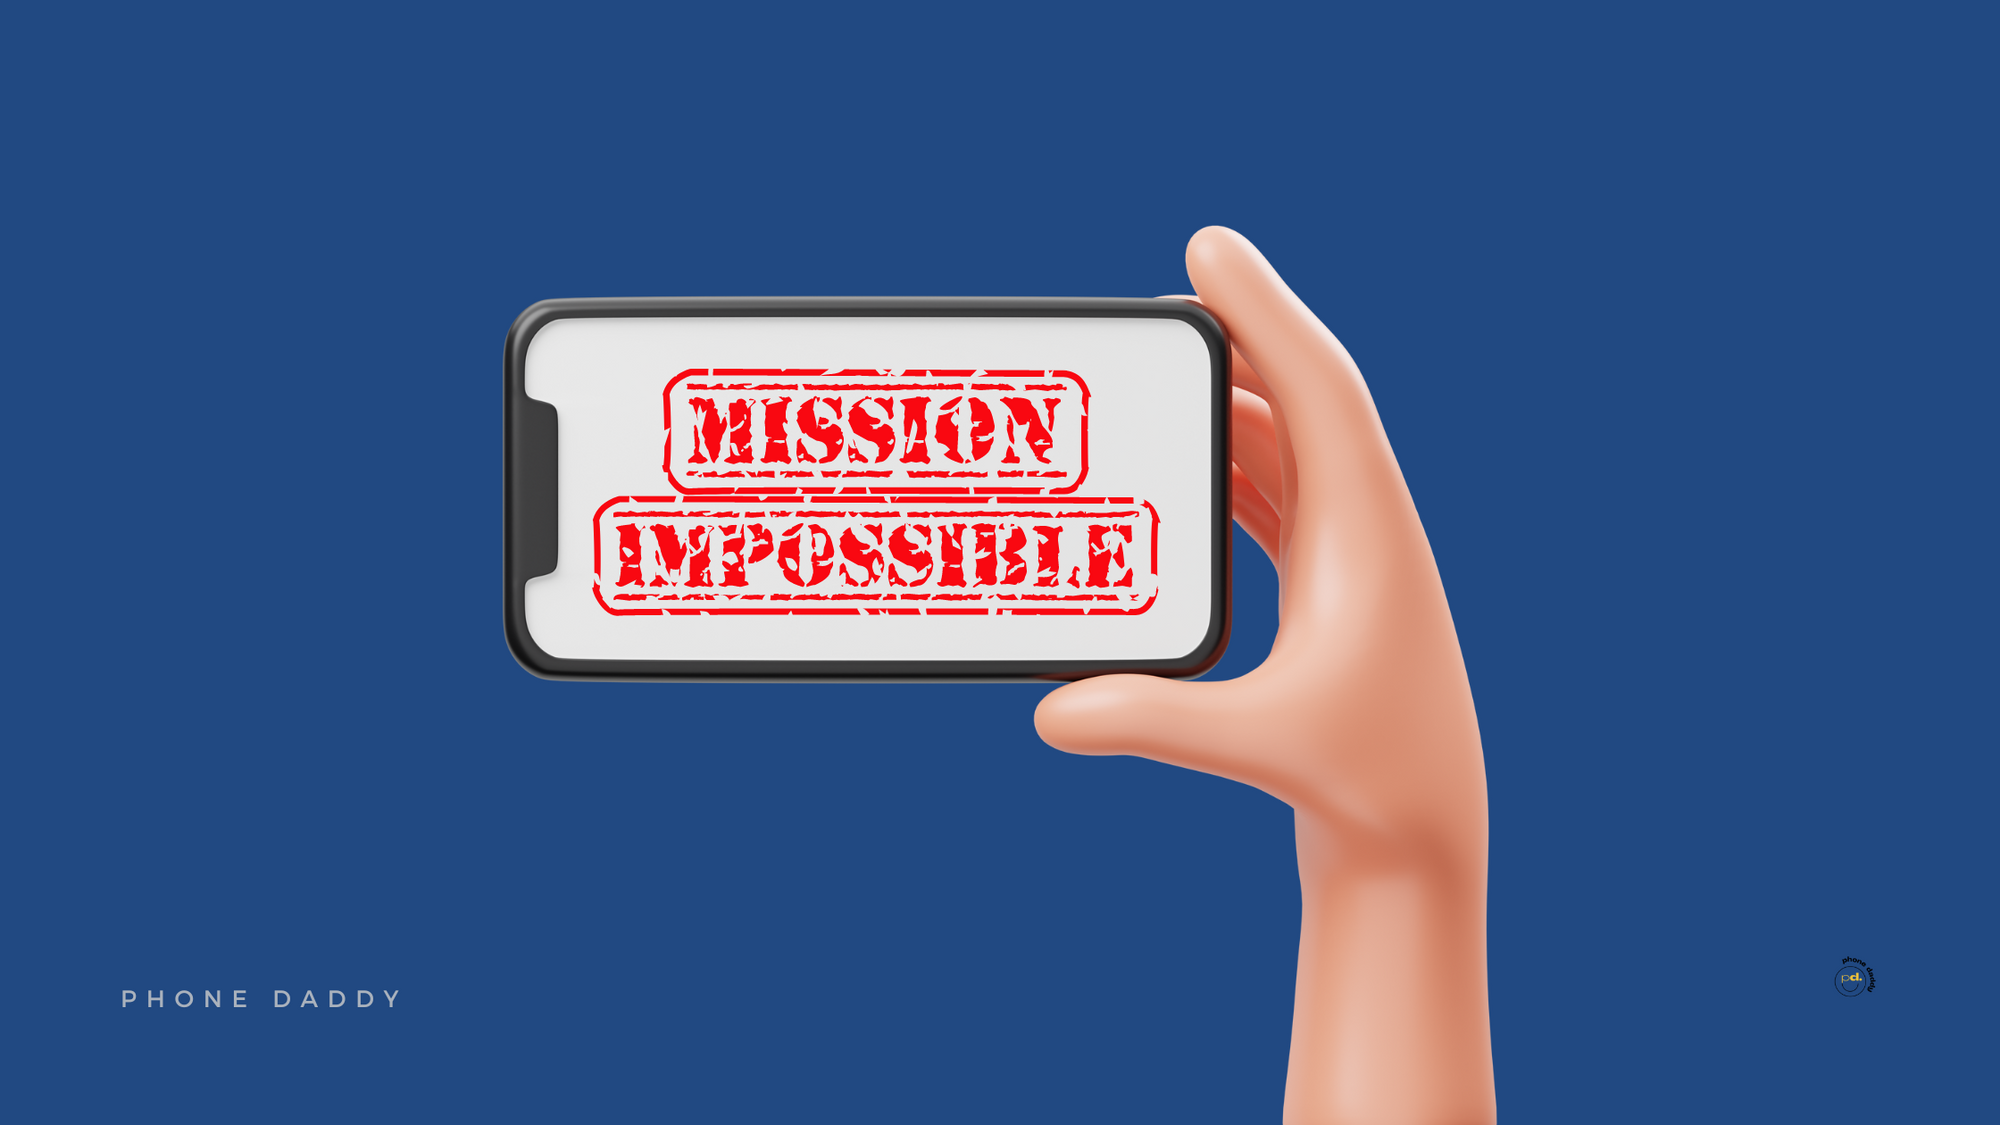 Where Can I Watch Mission Impossible on My Mobile for Free?